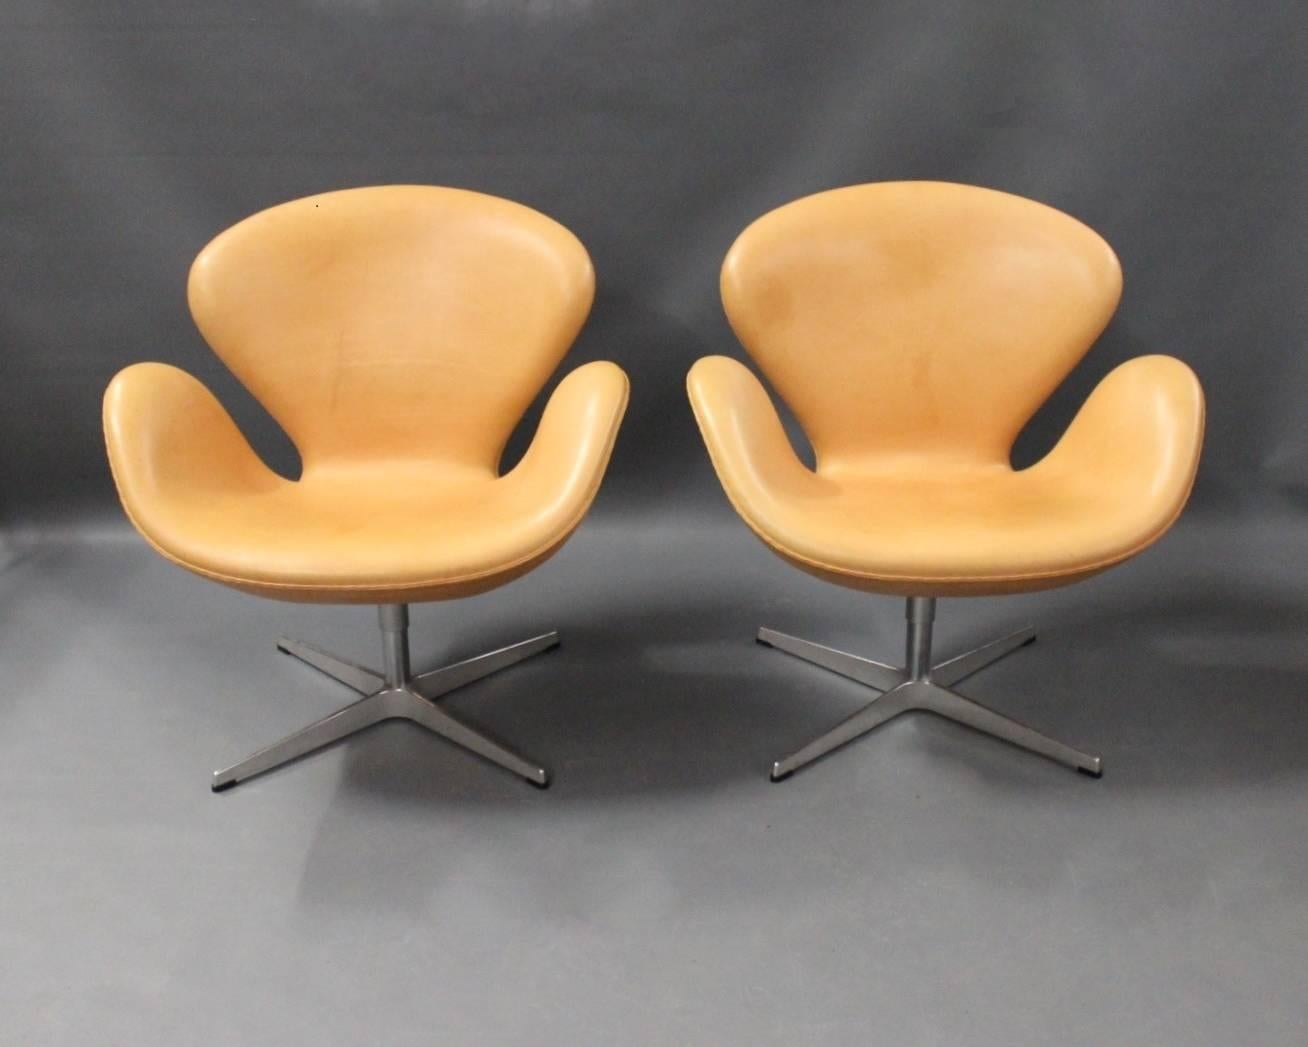 A pair of Swan chairs, model 3320, in natural leather with patina designed by Arne Jacobsen in 1958 and manufactured by Fritz Hansen in 2011.